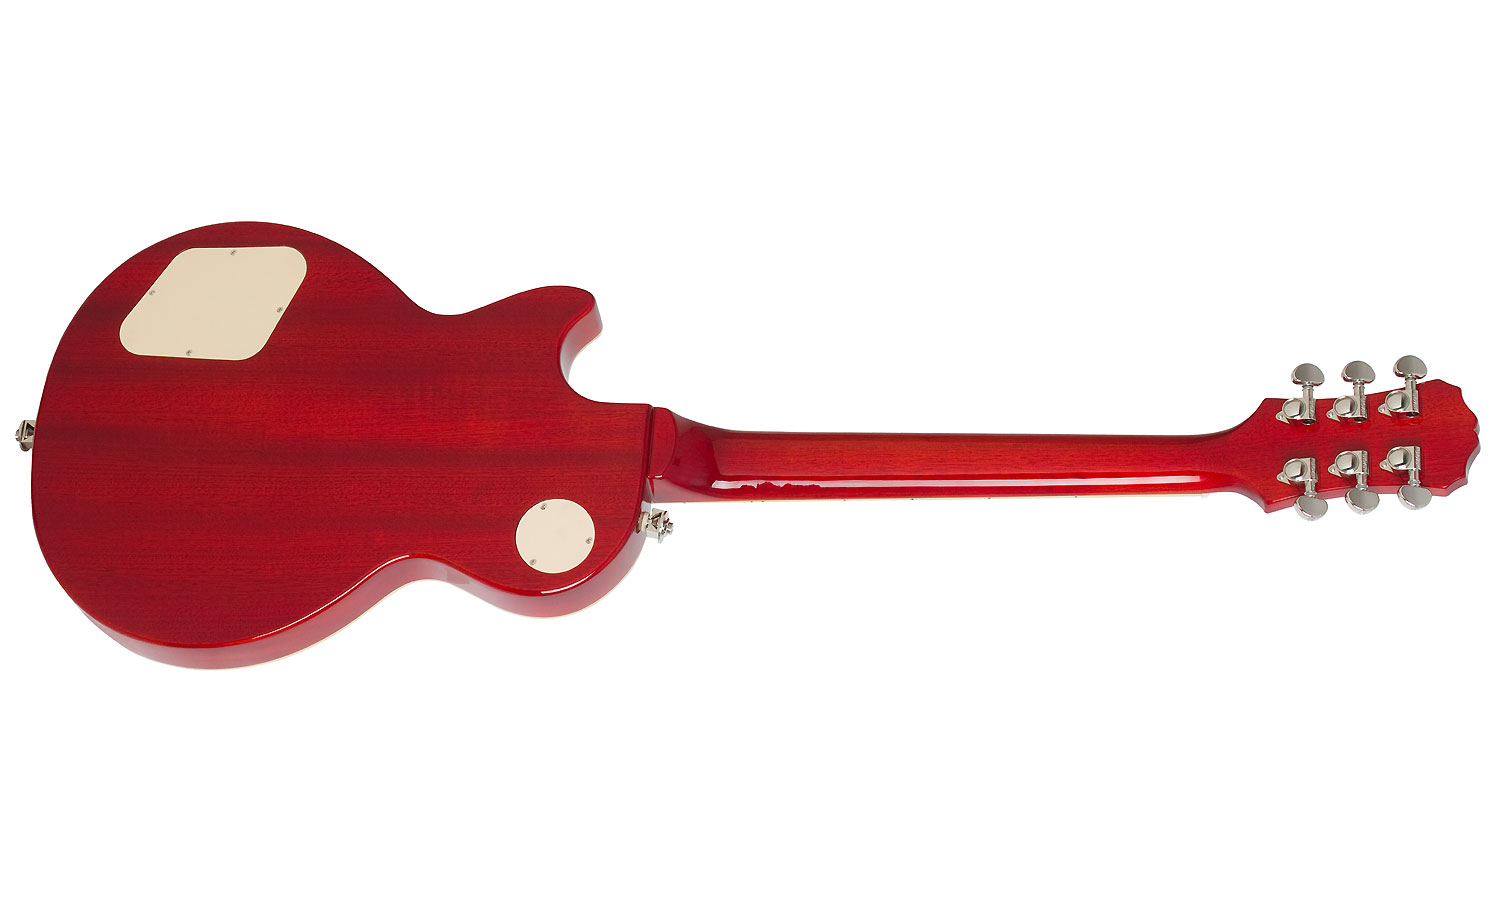 Epiphone Les Paul Tribute Plus Outfit Ch - Faded Cherry - Single cut electric guitar - Variation 2